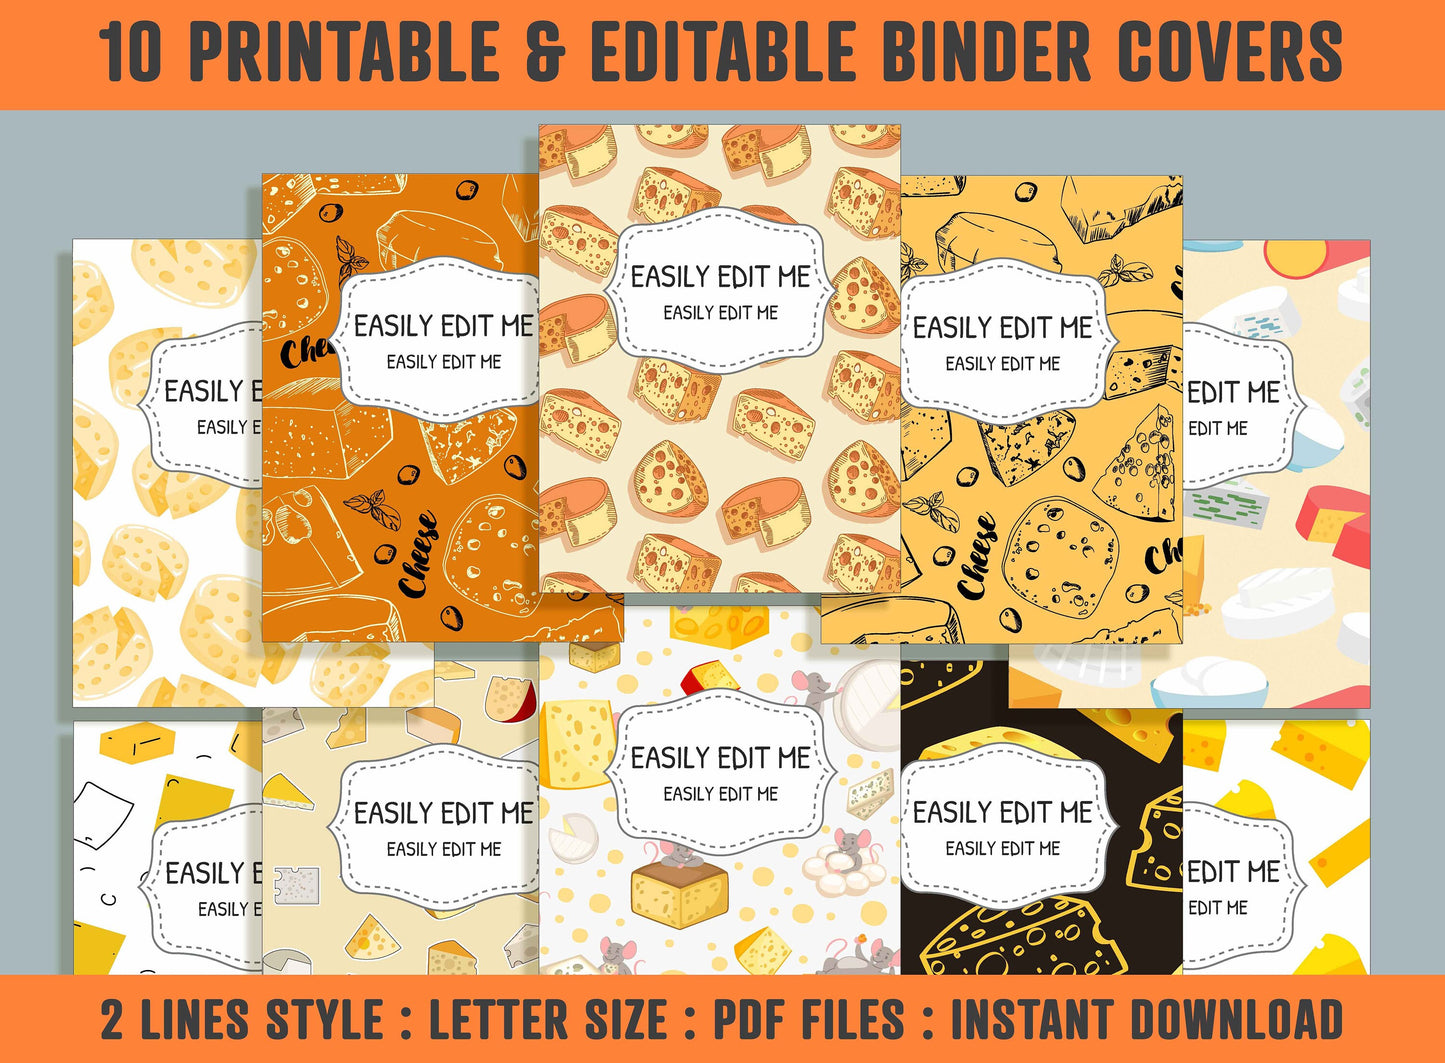 Cheese Binder Cover, 10 Printable & Editable Covers + Spines, Teacher/School Binder Labels, Planner Cover Template, Food Binder Inserts